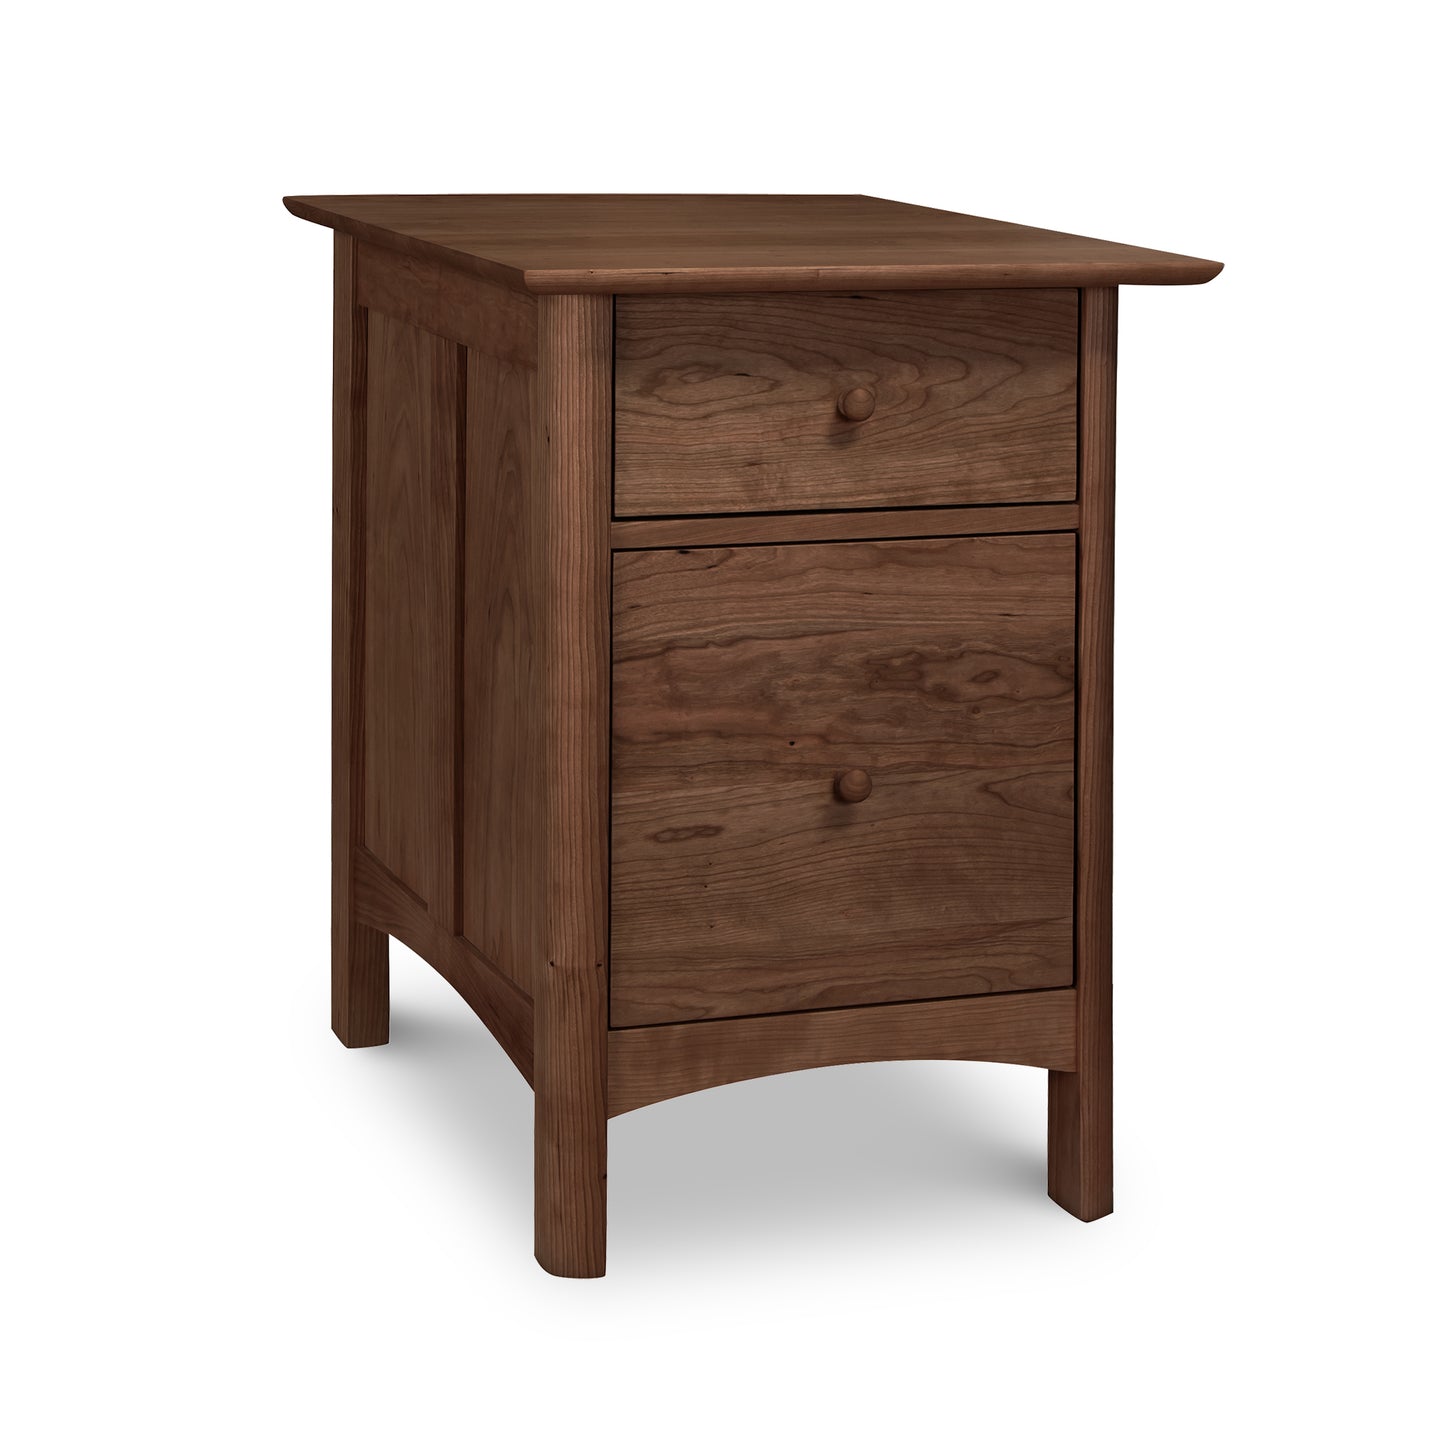 Heartwood Shaker Vertical File Cabinet from Vermont Furniture Designs, crafted from sustainably harvested North American hardwoods, isolated on a white background.